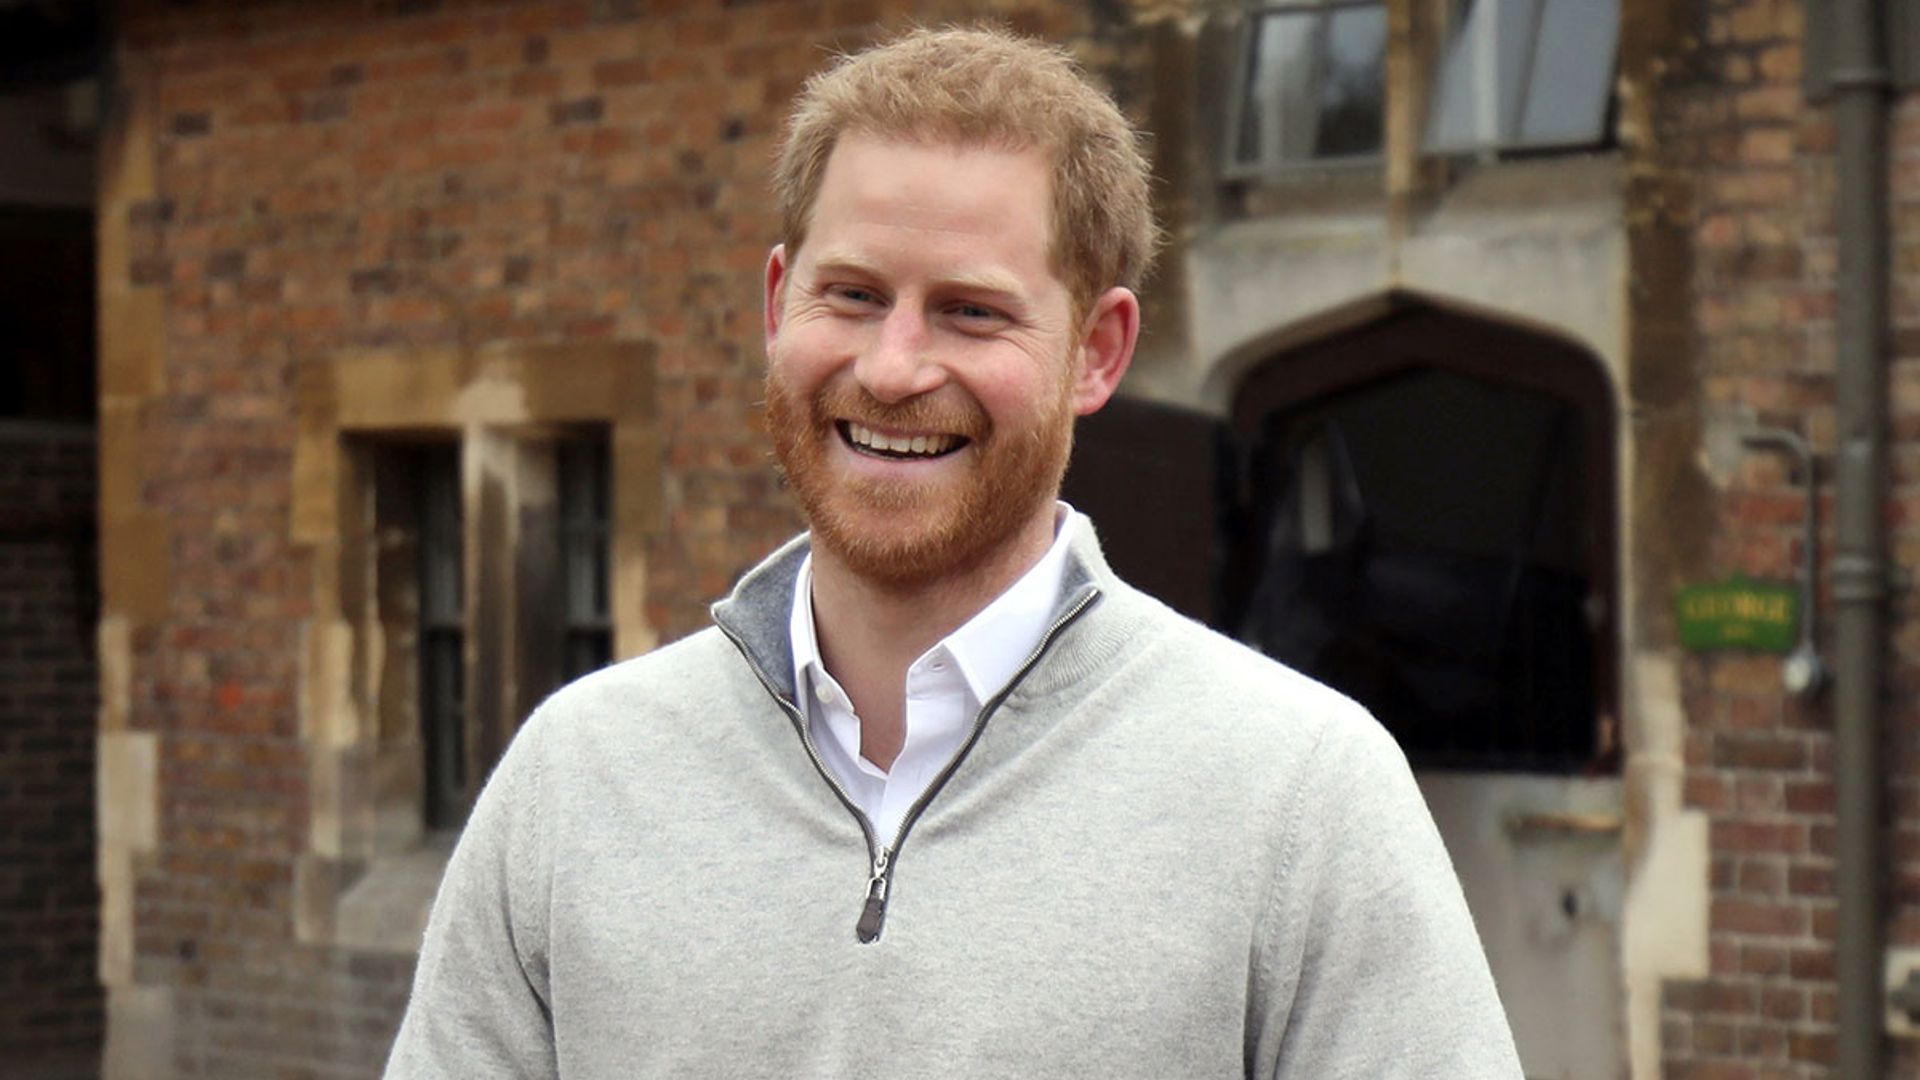 OPINION: It's a joy to watch Prince Harry leave the sadness of his childhood behind him